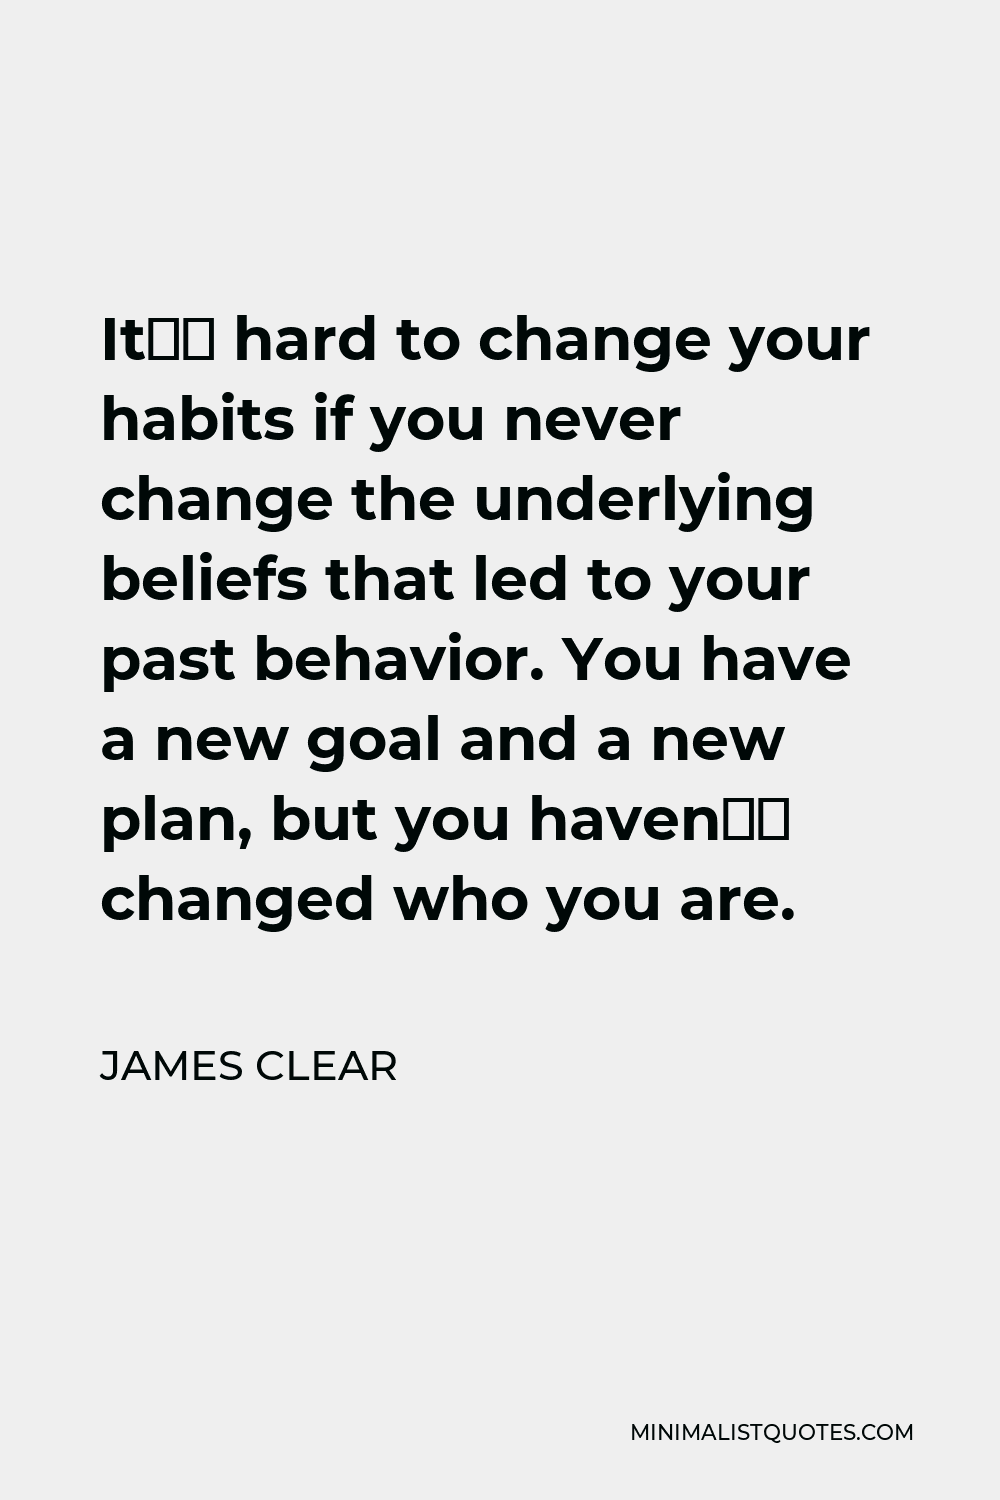 James Clear Quote - It’s hard to change your habits if you never change the underlying beliefs that led to your past behavior. You have a new goal and a new plan, but you haven’t changed who you are.